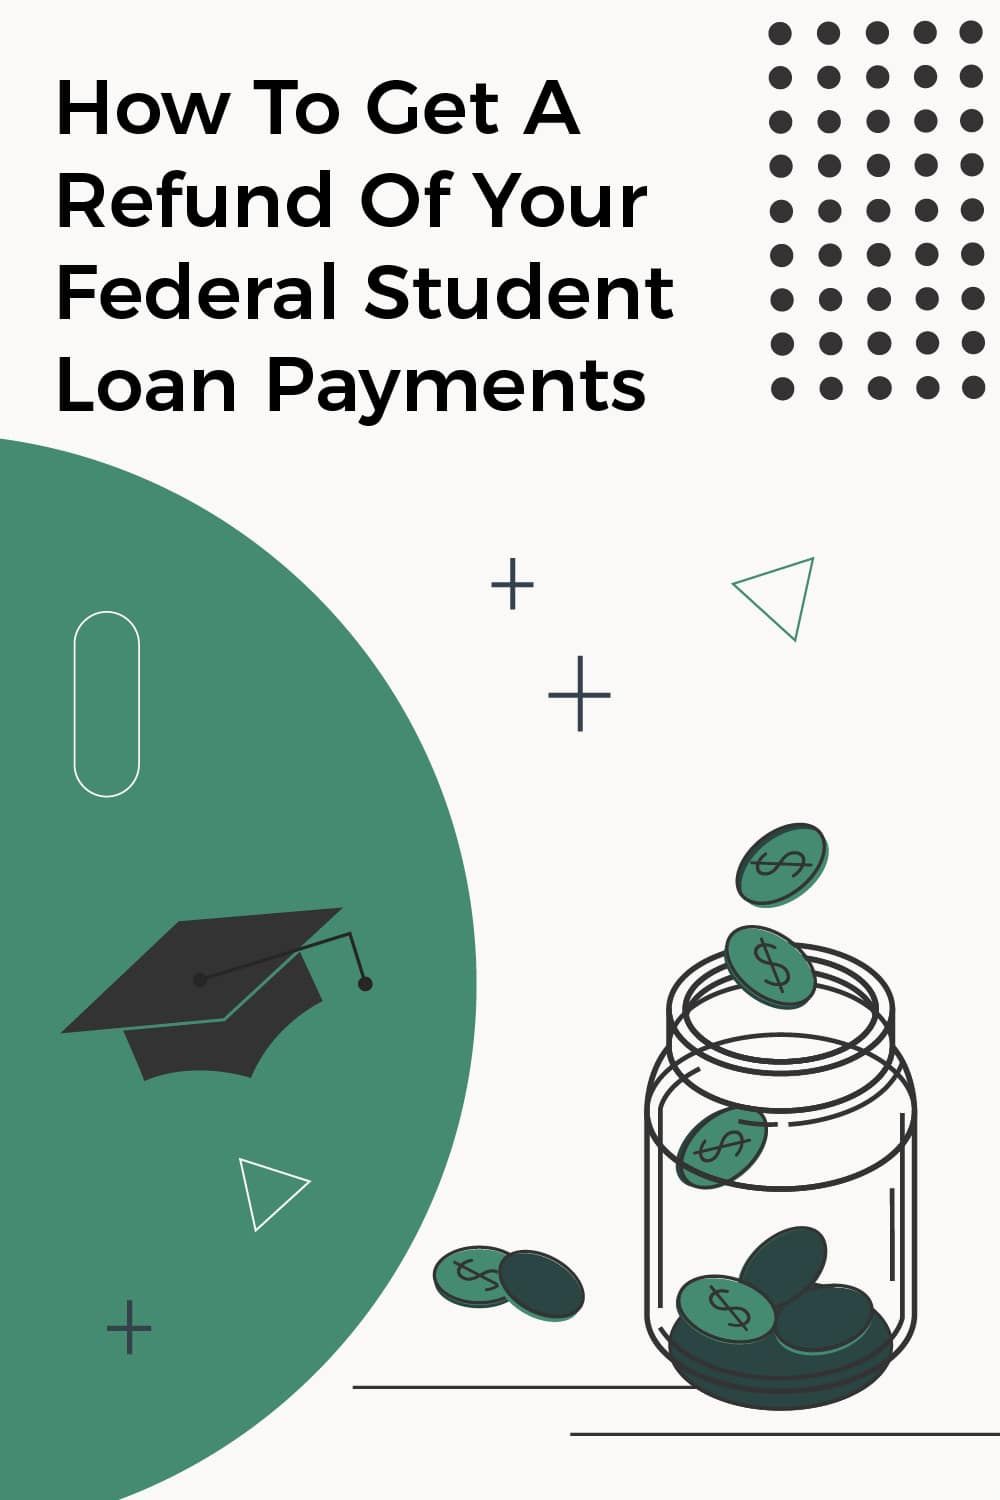 How To Get A Refund Of Your Federal Student Loan Payments